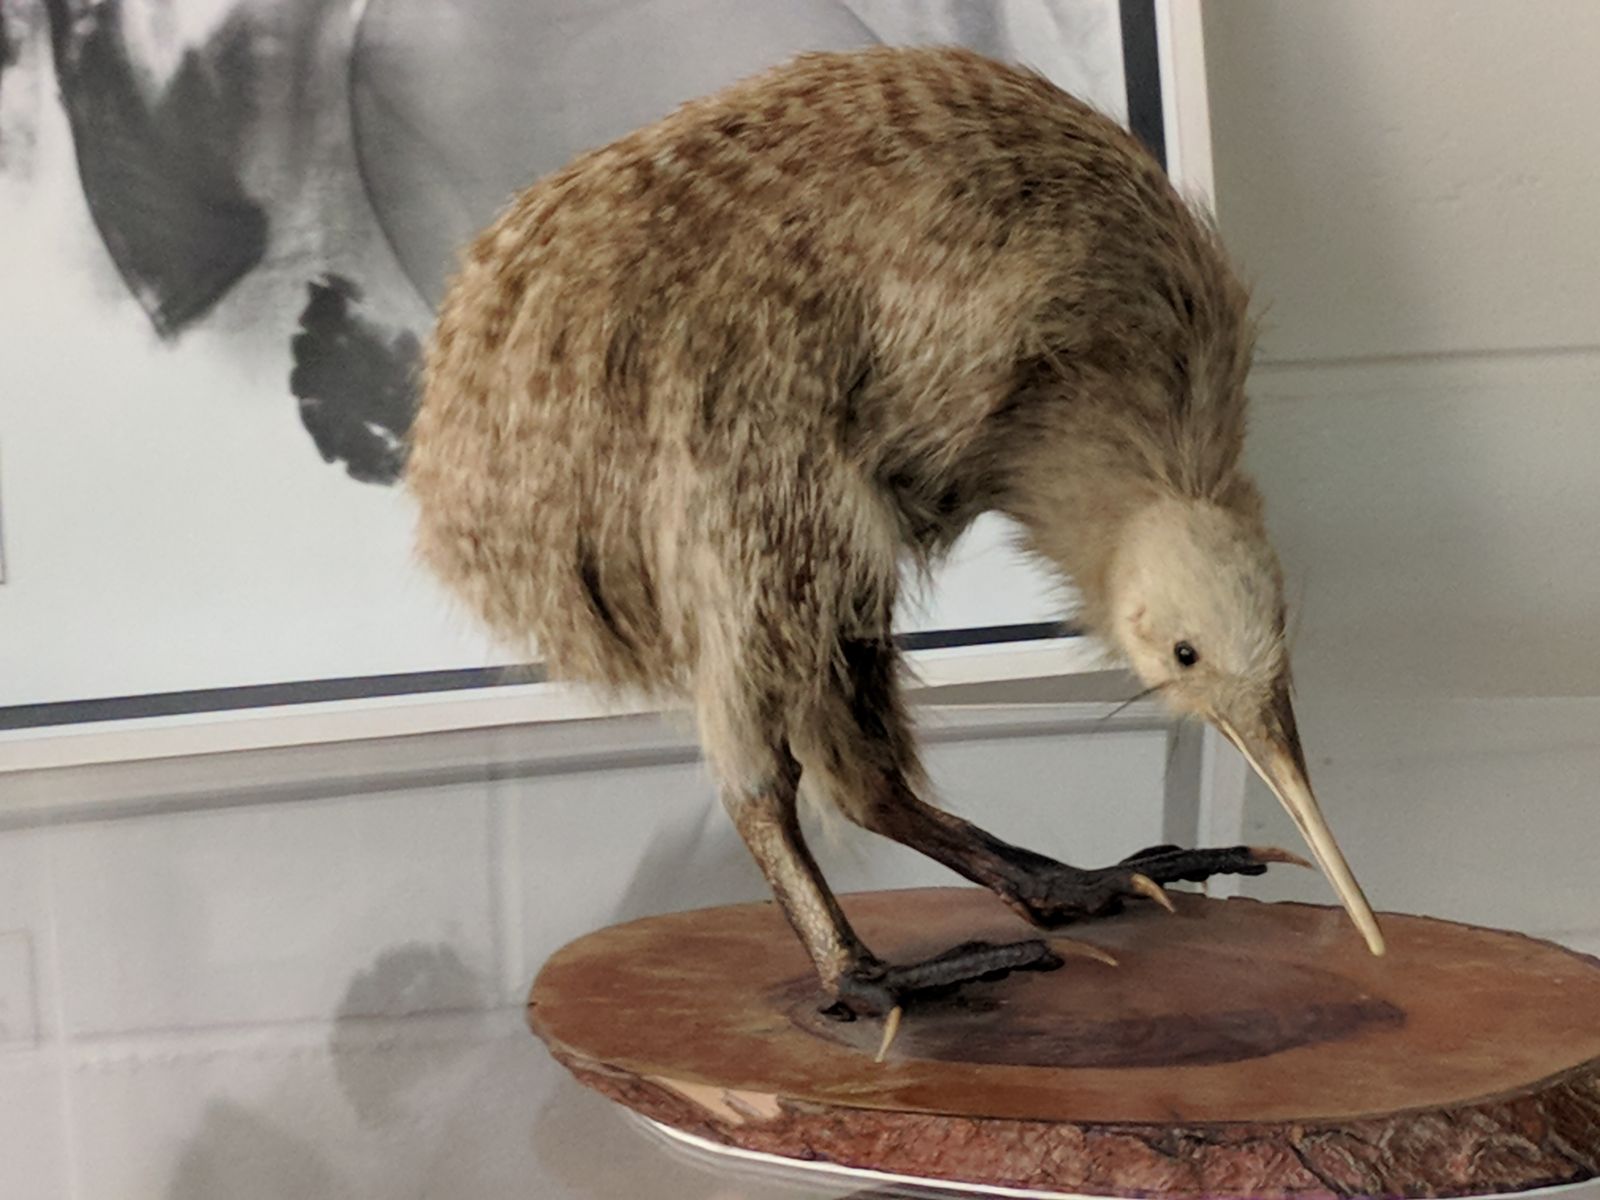 74--Kiwi is NZ's national bird--eggs almost as big as an ostrich's